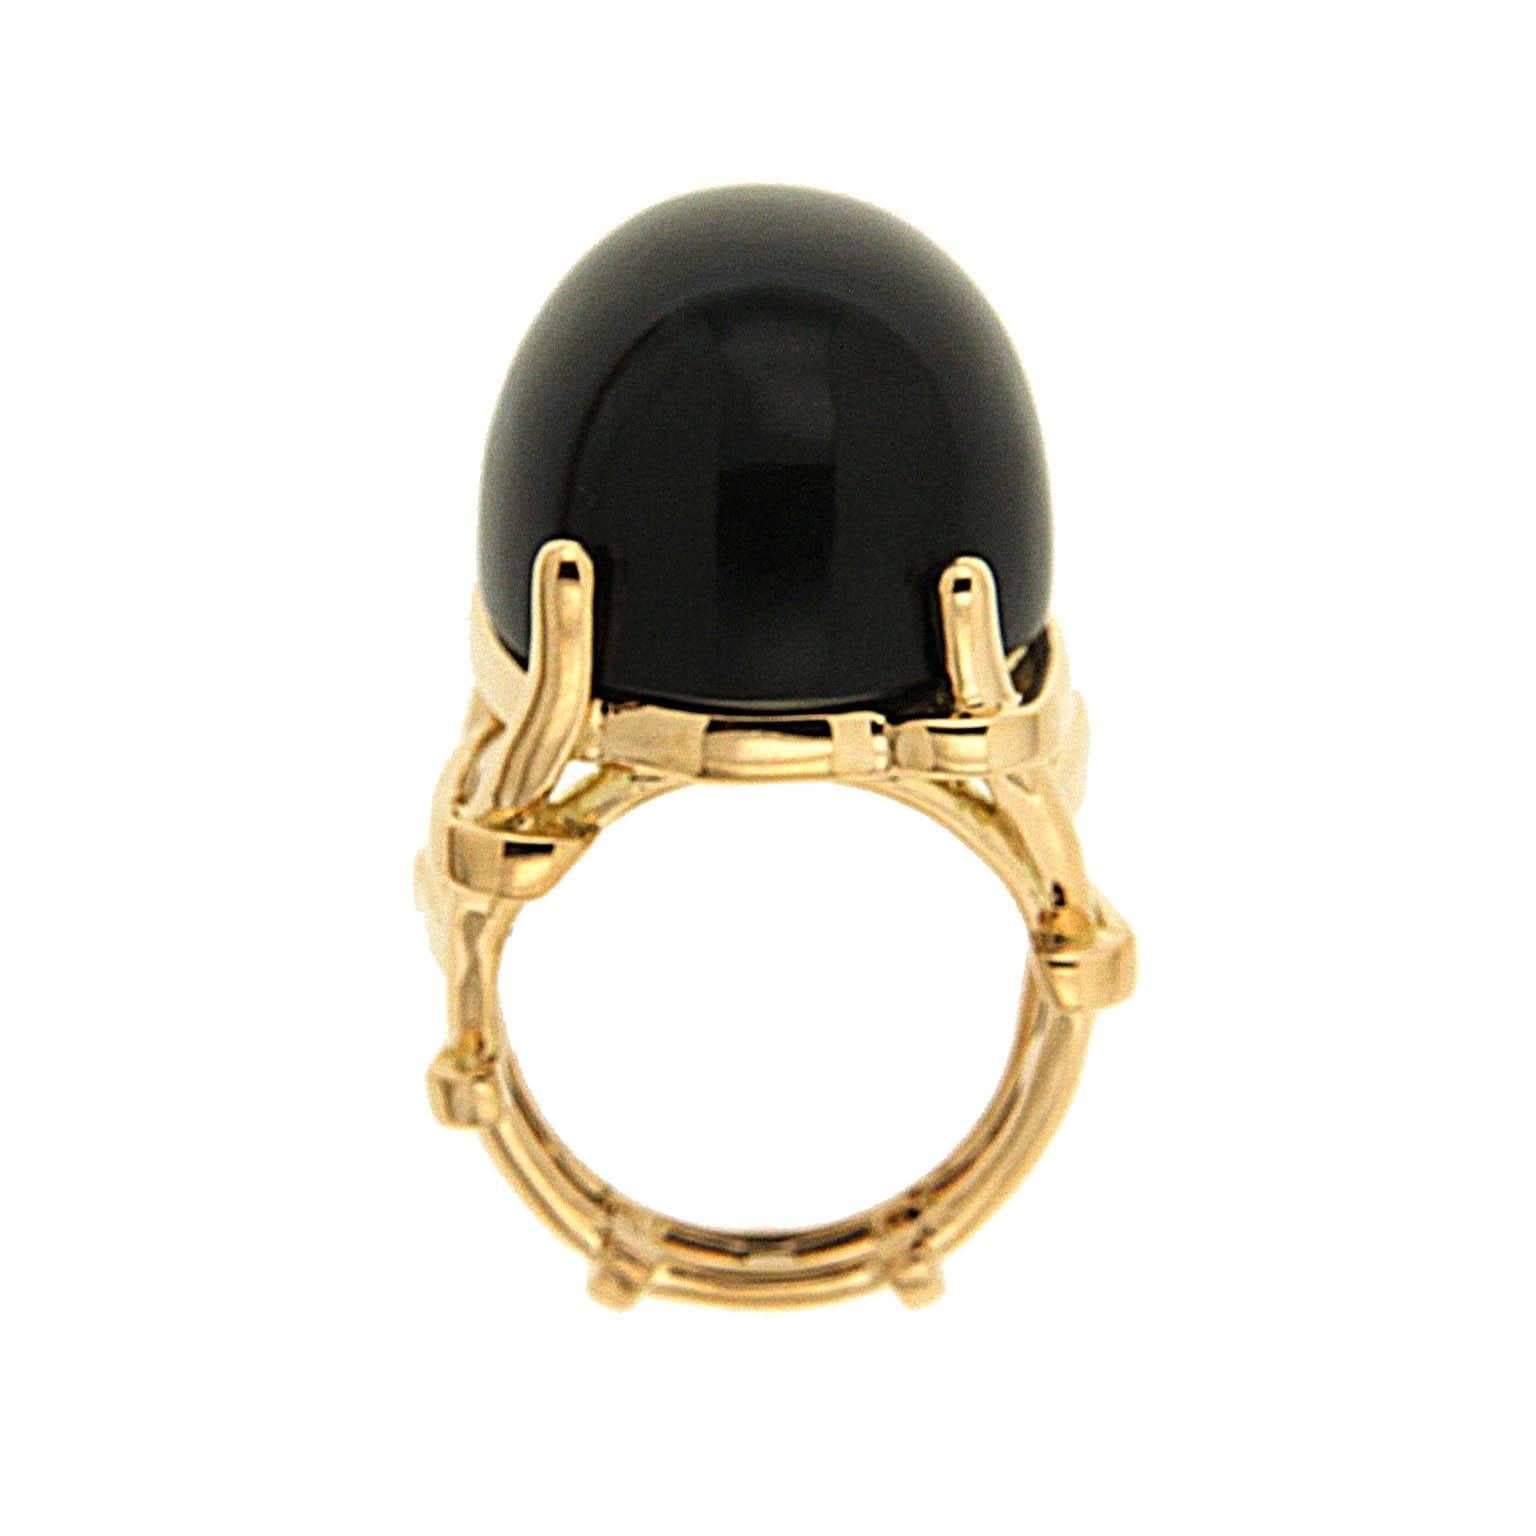 A polished oval cabochon of black jade underlines its gleam. 18k yellow gold round prongs secure the gem. A split shank begins below the prongs in gold strips as they transform into a trellis design. The total weight of the black jade is 56.75